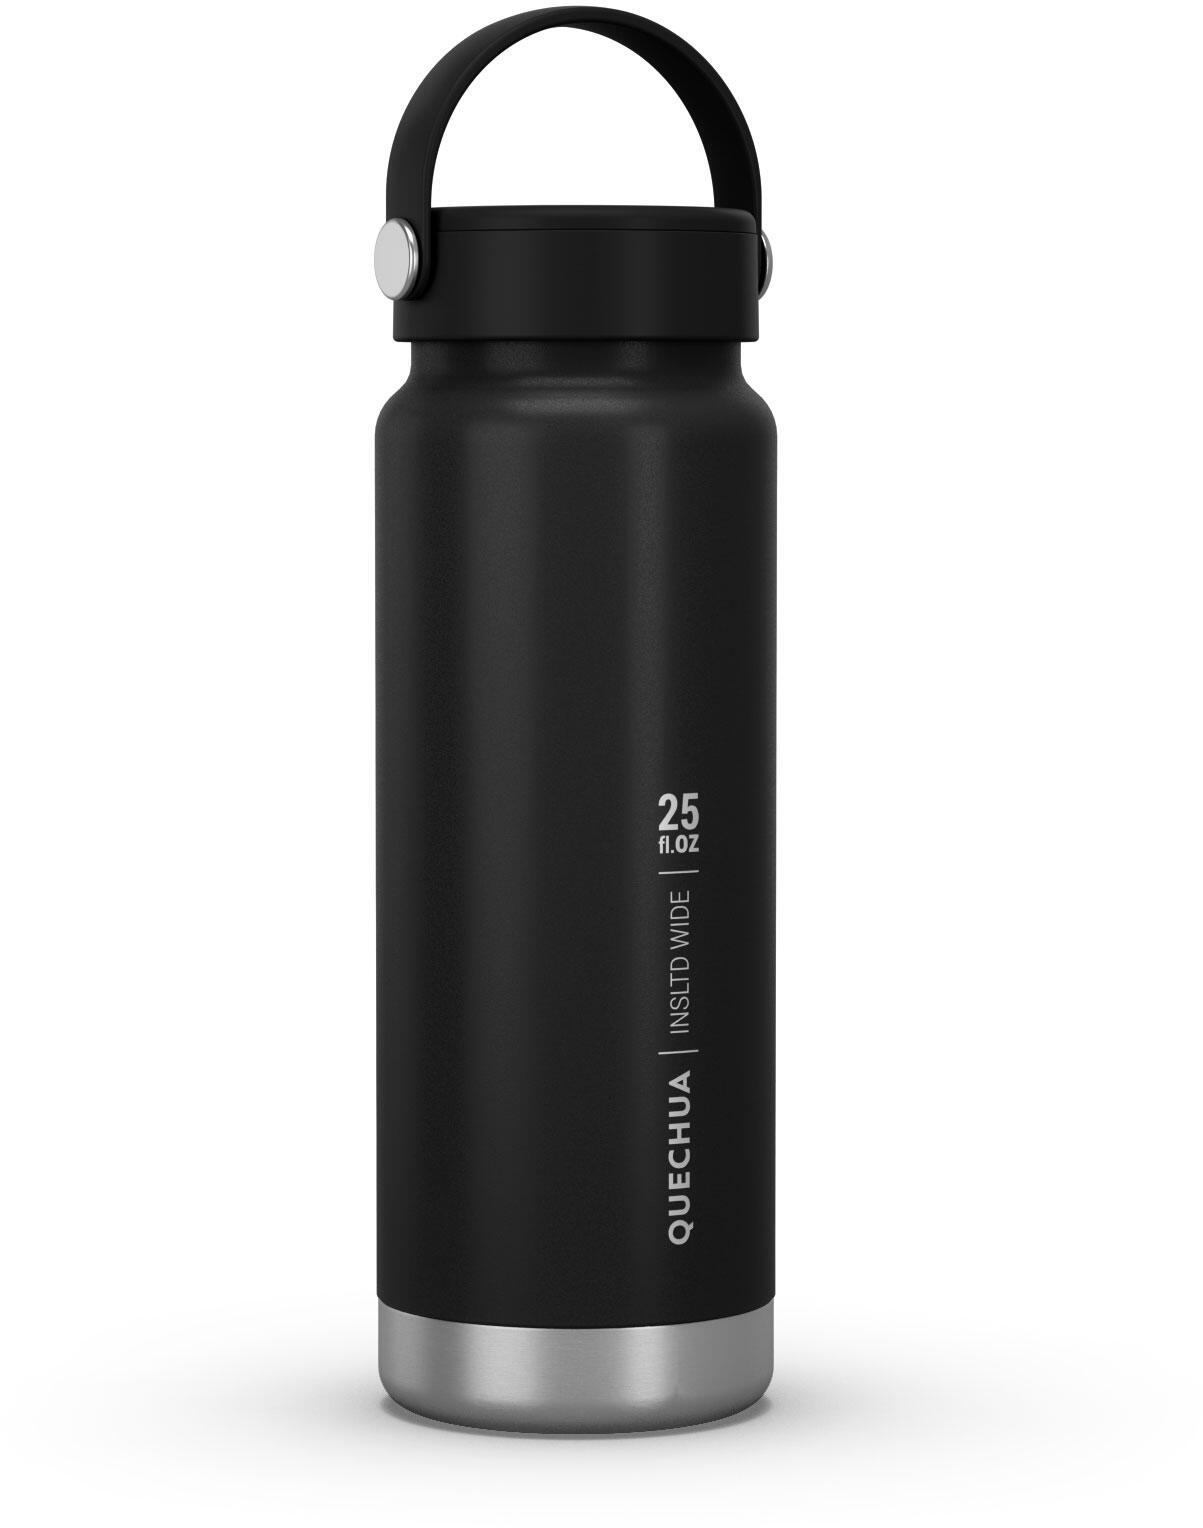 https://op1.0ps.us/original/opplanet-decathlon-quechua-double-wall-insulated-wide-mouth-stainless-steel-water-bottle-black-25oz-4266687-main